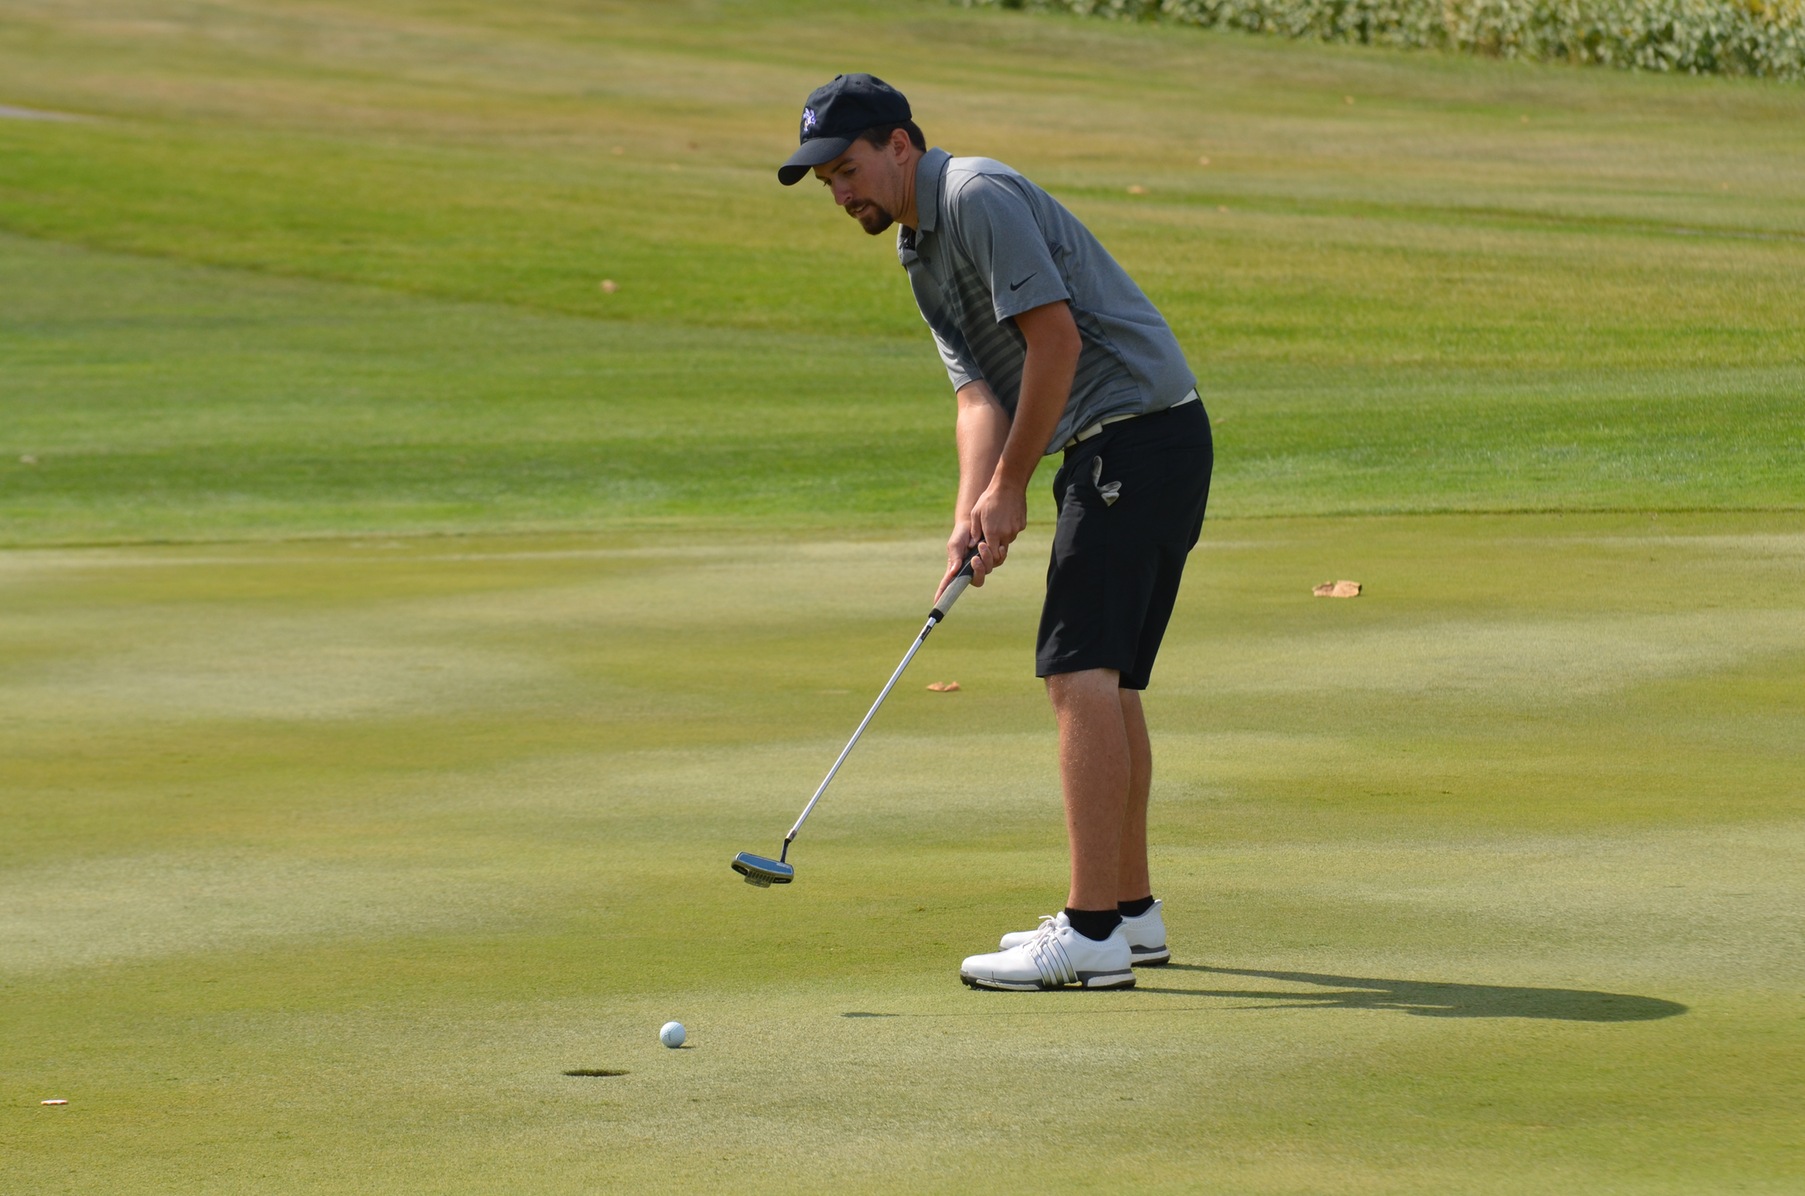 Men's Golf Wraps Up Day Three of the HCAC Championship